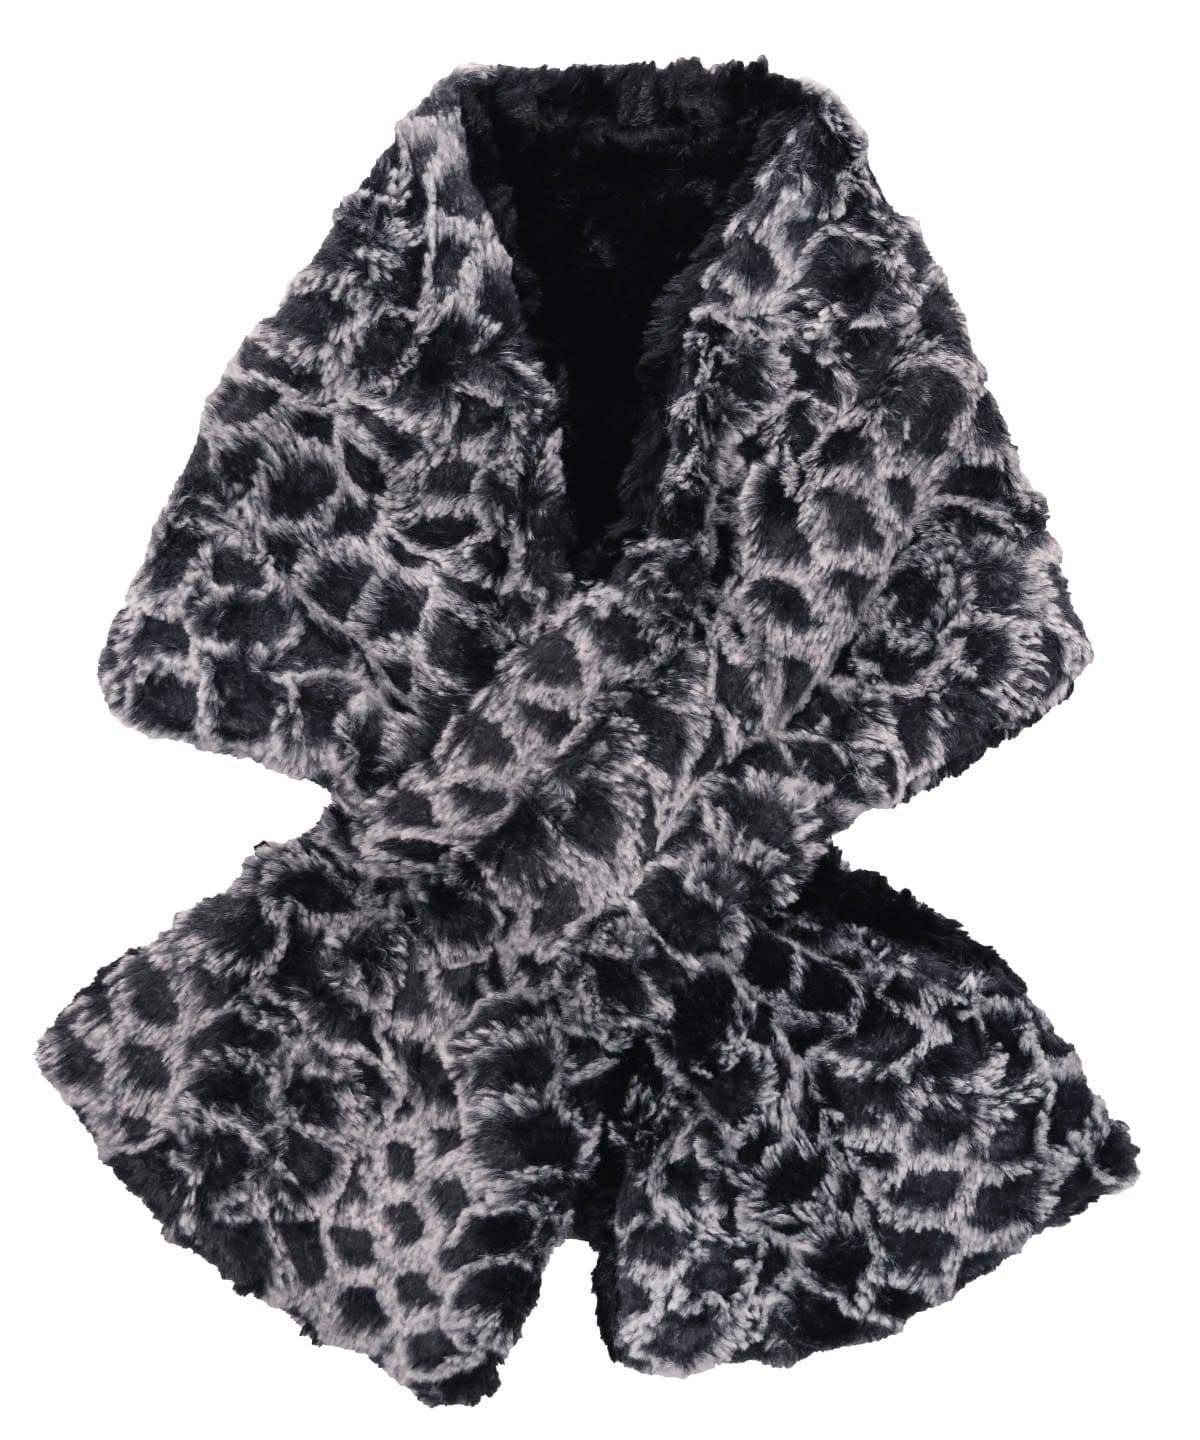 Pull-Thru Scarf - Luxury Faux Fur in Snow Owl  - Sold Out!